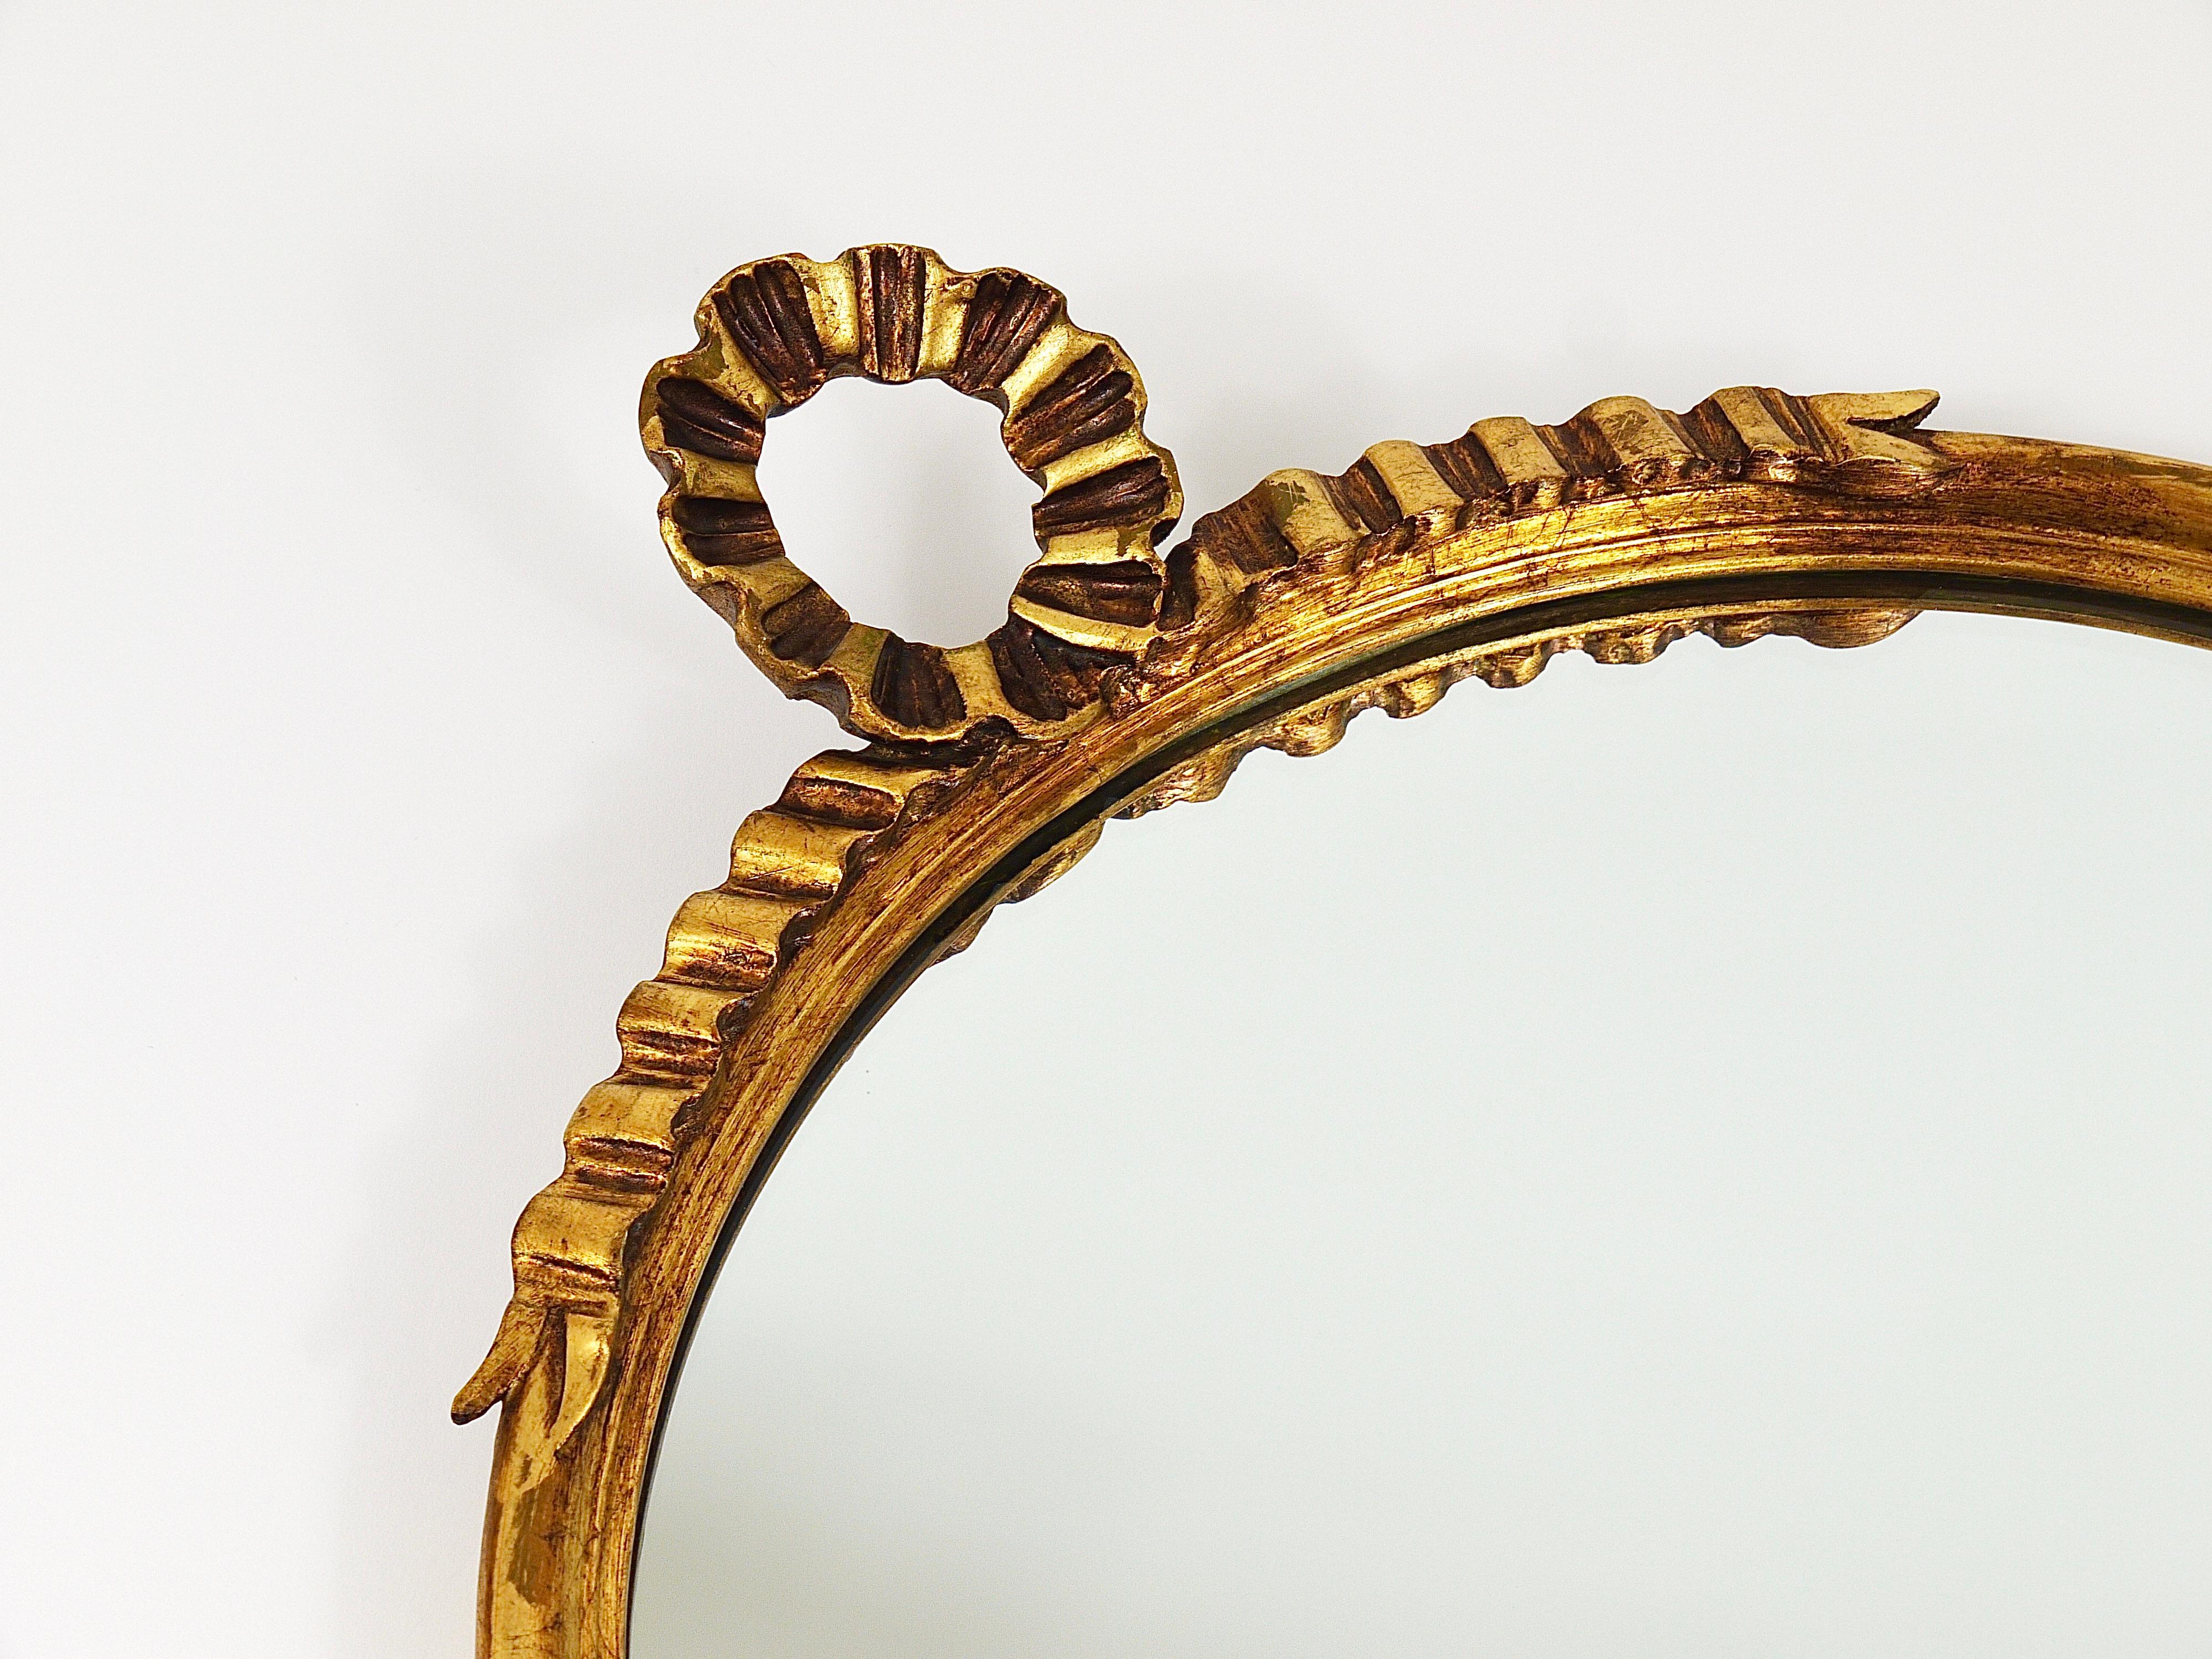 Round Midcentury Gilt Wood Wall Mirror, C. Allodi & G. Subelli, Italy, 1950s For Sale 11